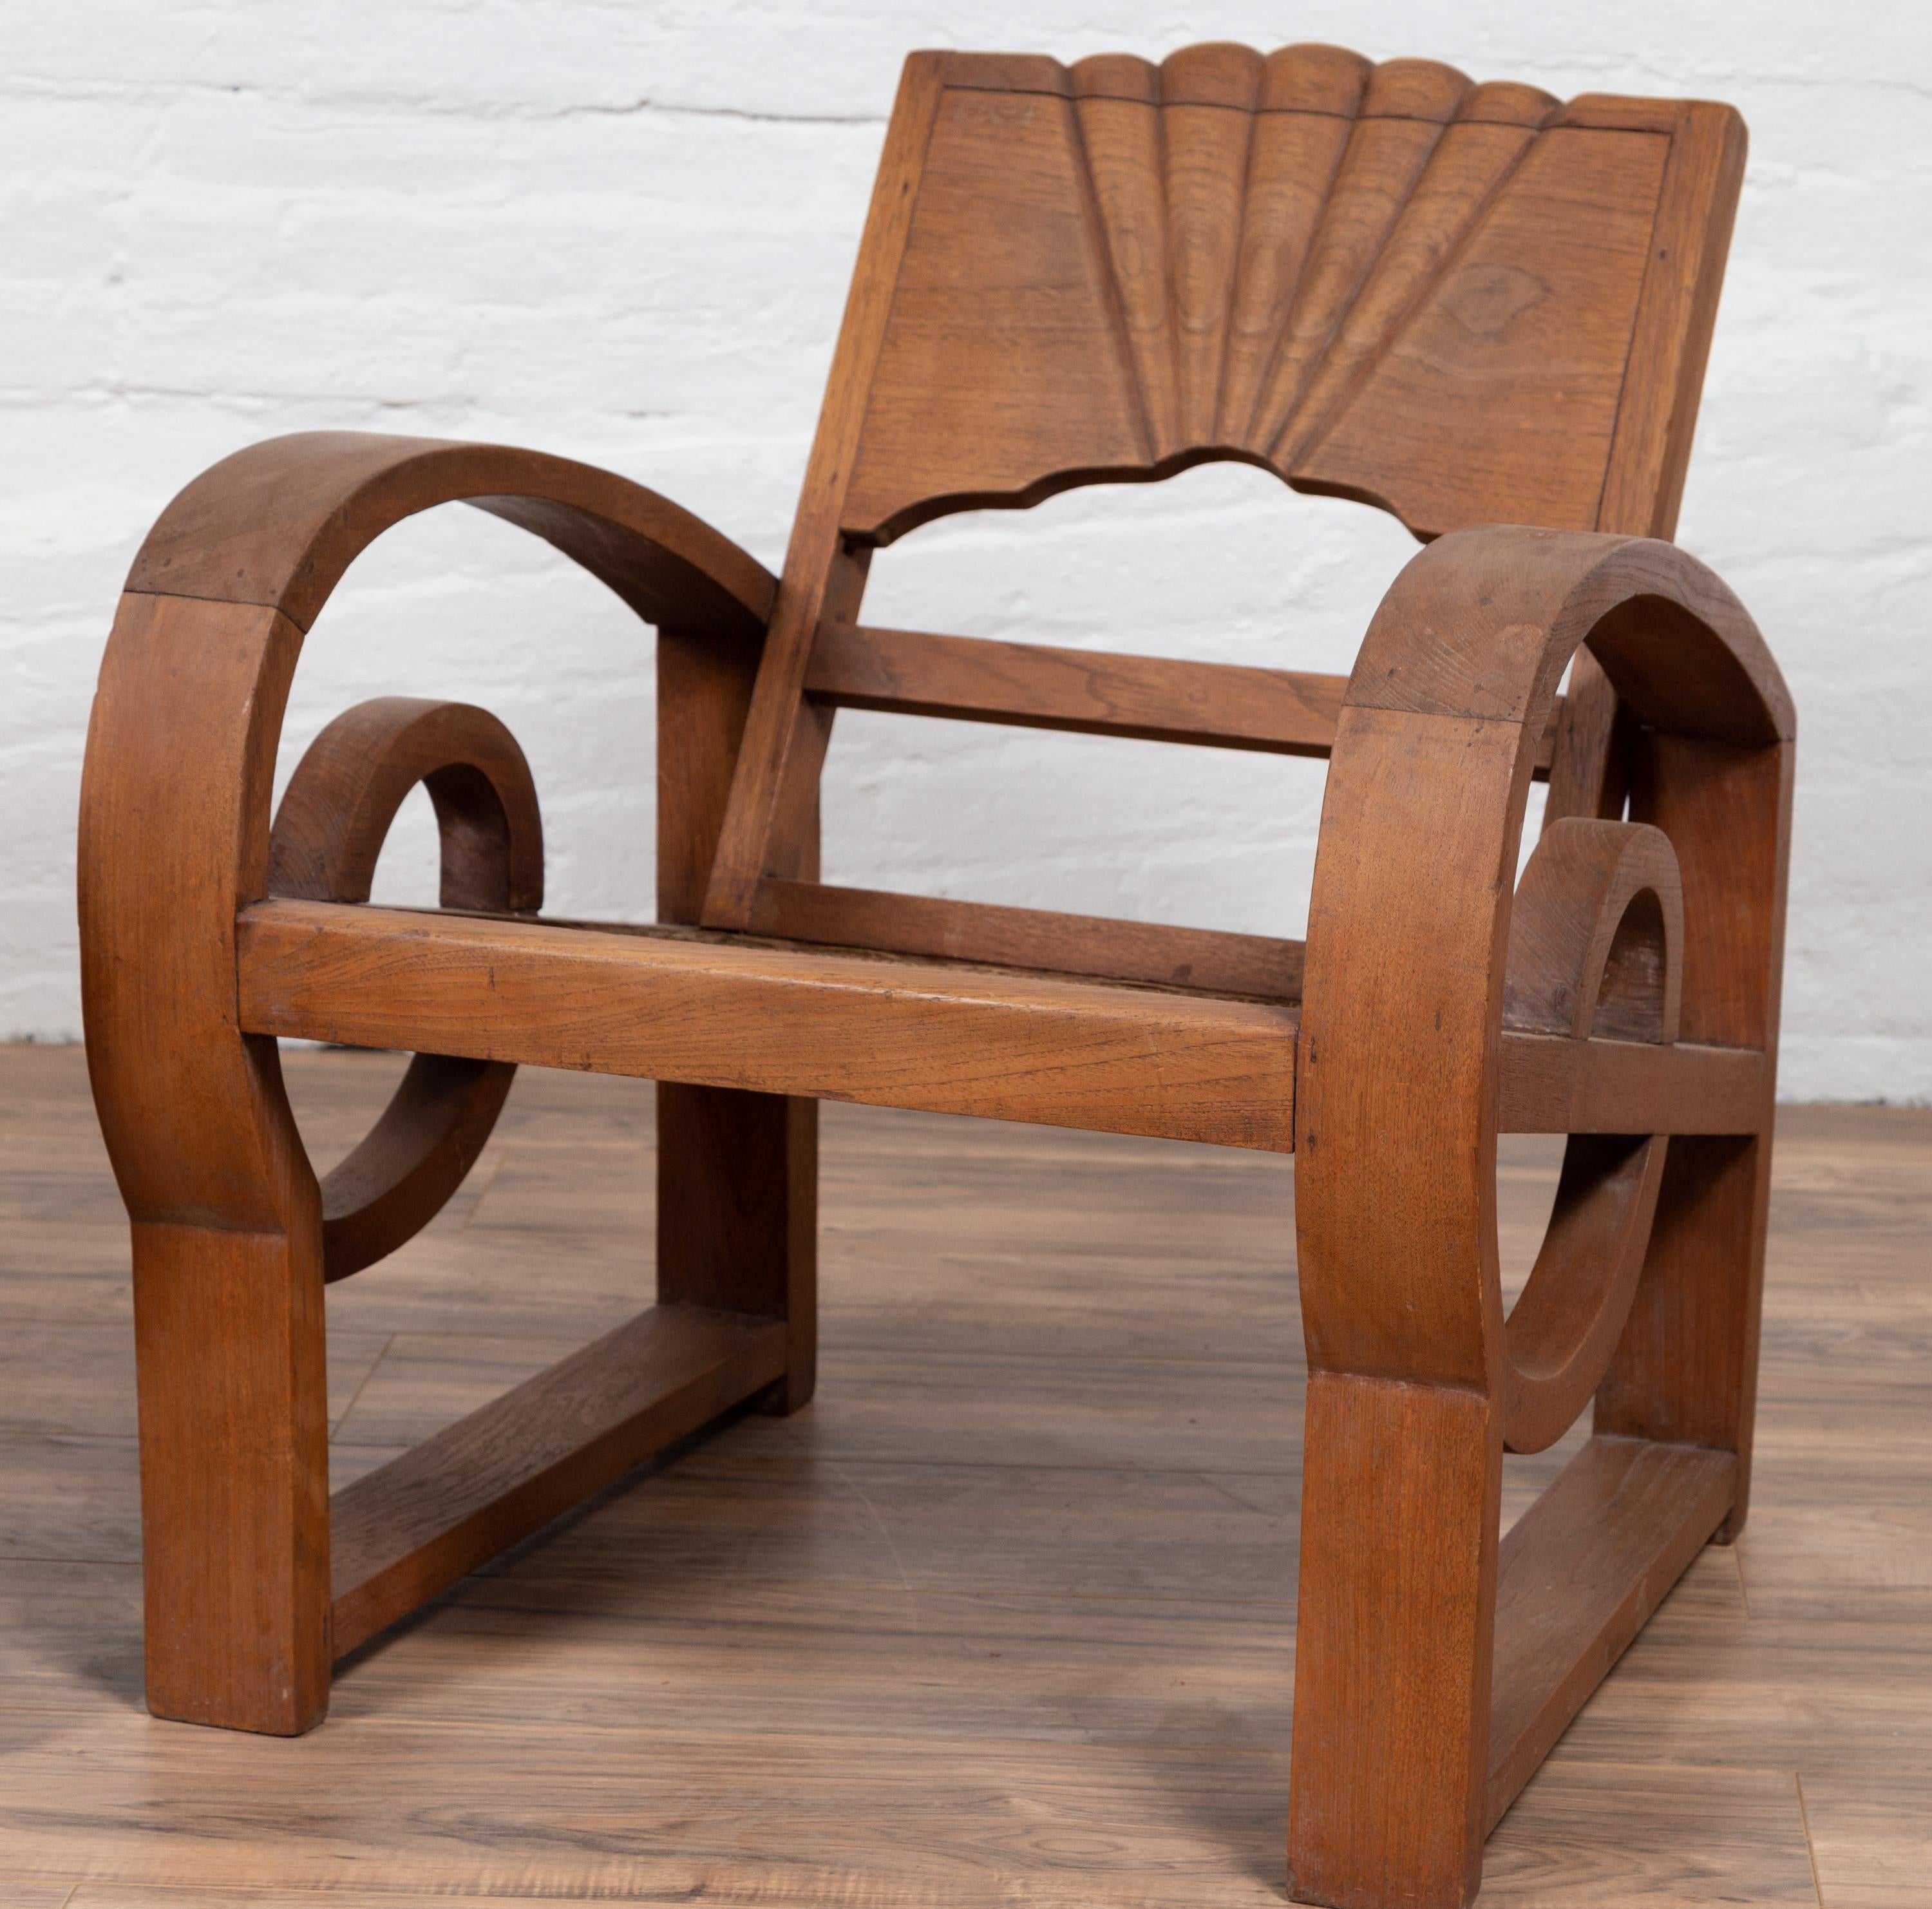 Pair of Teak Wood Country Chairs from Madura with Rattan Seats and Looping Arms 1